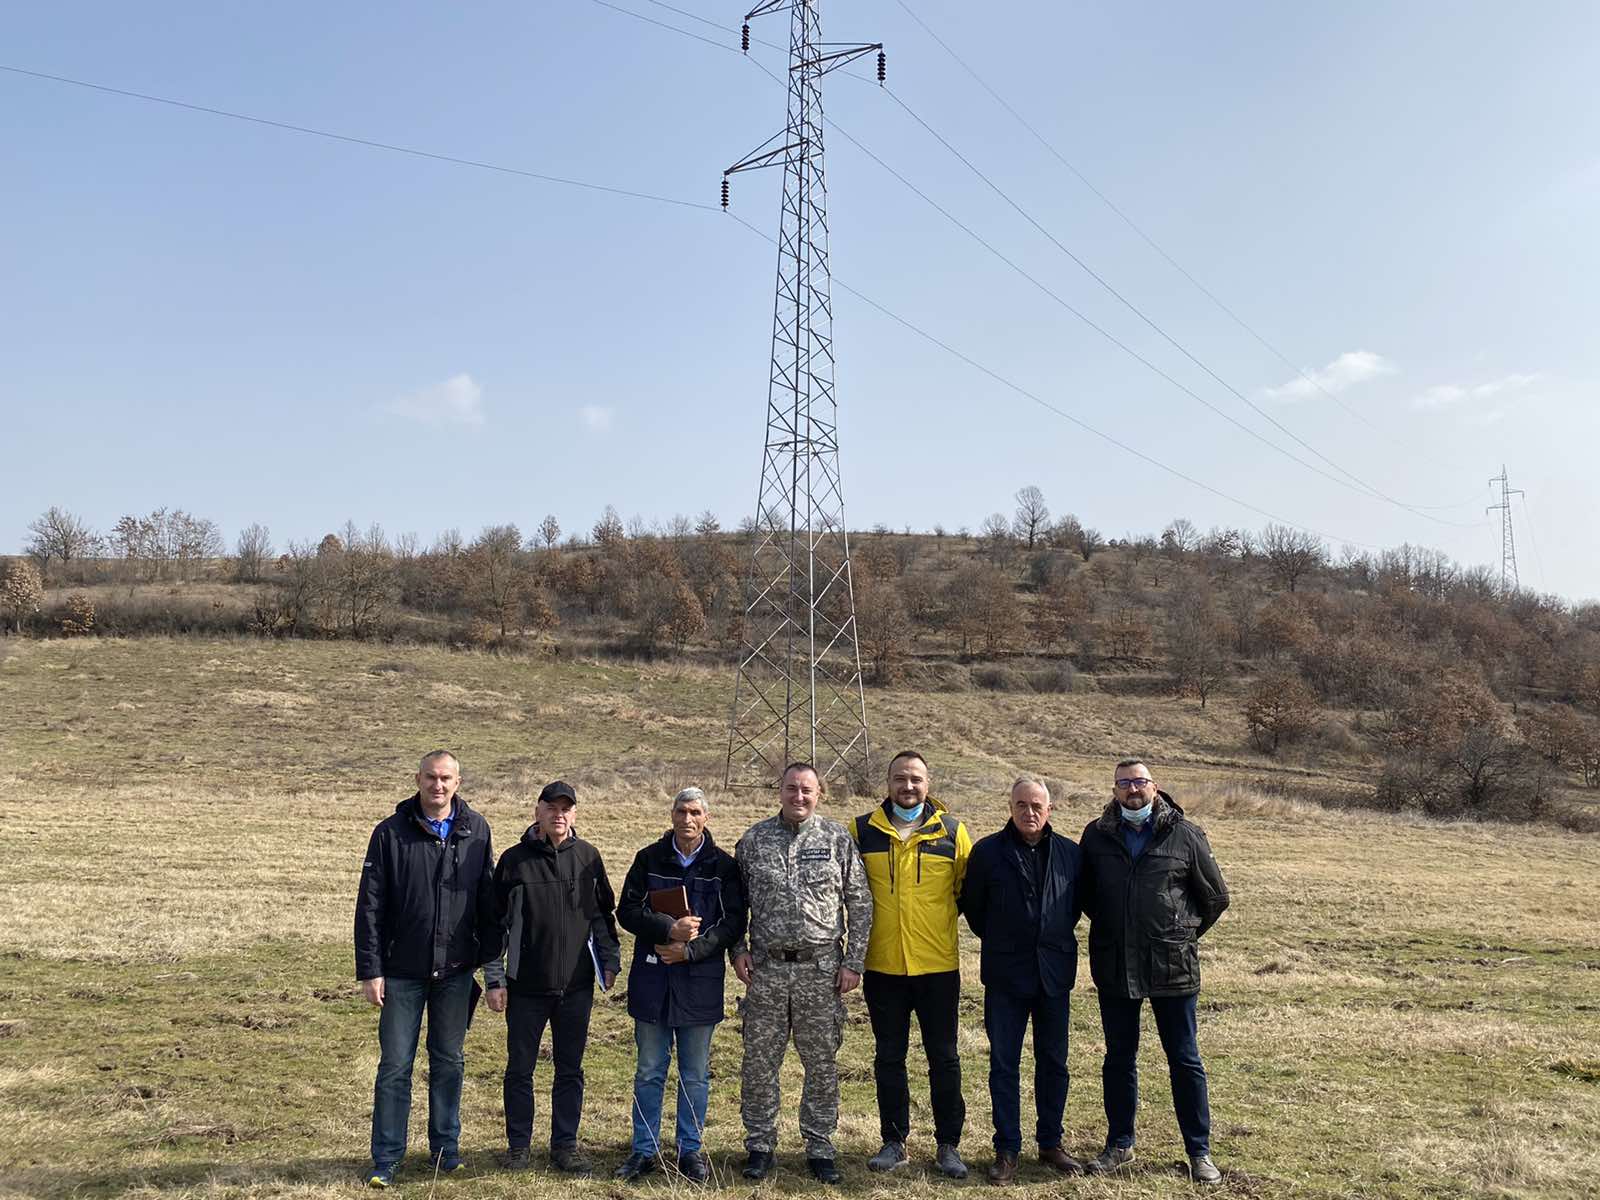  Bujanovac site visit with potential offerors  